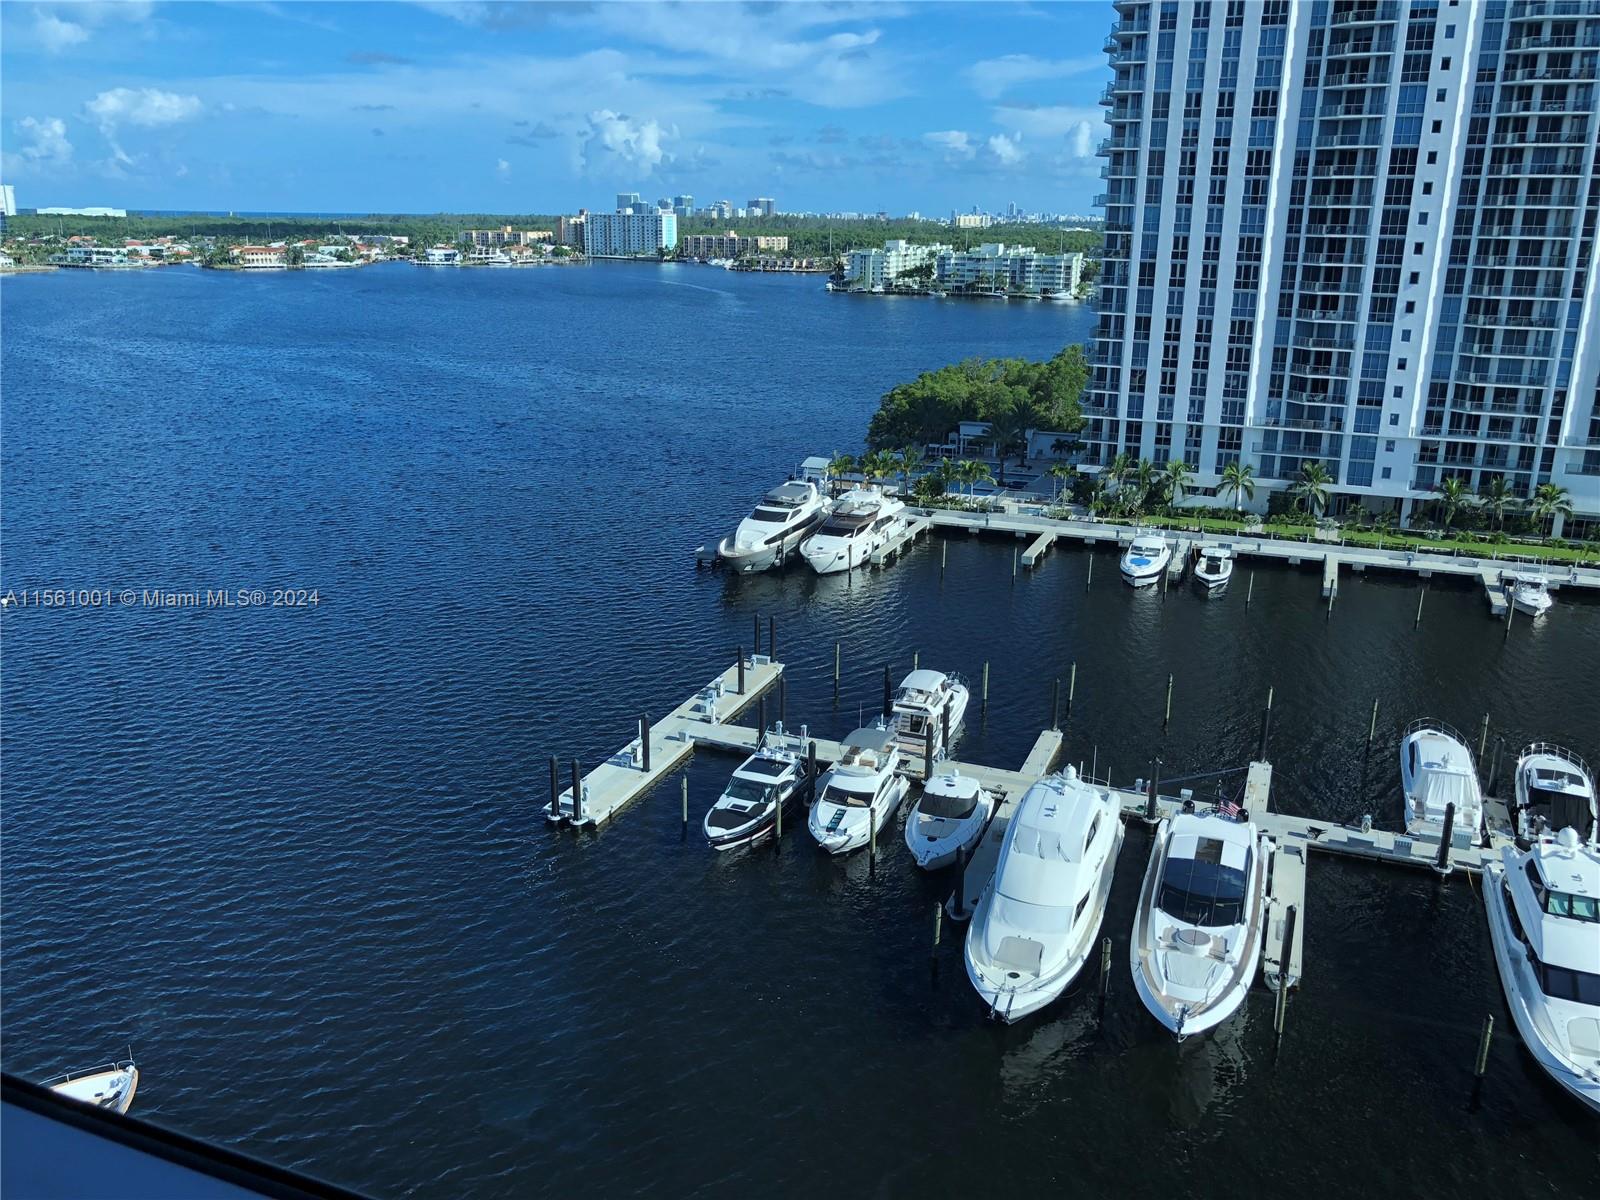 ONE OF THE BEST MARINA AND BAHIA VIEWS FROM THE WHOLE BUILDING. IMPRESSIVE, MODERN 2 BEDROOMS WITH 2 FULL BATHROOMS UNIT. PORCELAIN FLOORS, SUBZERO FRIDGE AND FREEZER, WOLF APPLIANCES, TOP OF THE LINE FINISHES THROUGHOUT THE WHOLE APT. AMENITIES INCLUDE: INFINITY POOL, KID'S POOL, HOT TUB, SPA WITH SAUNA, STEAN AND MASSAGE ROOM, FITNESS CENTER, TEEN ROOM, BUSINESS ROOM, AND MORE! UNIT COMES WITH A BIG STORAGE SPACE INCLUDED AND 2 PARKING SPACES, 1 FIXED, COVERED AND THE OTHER ONE WITH VALET. DON'T MISS THIS OPPORTUNITY TO OWN ONE OF THE BEST PLACES IN THE MARKET!